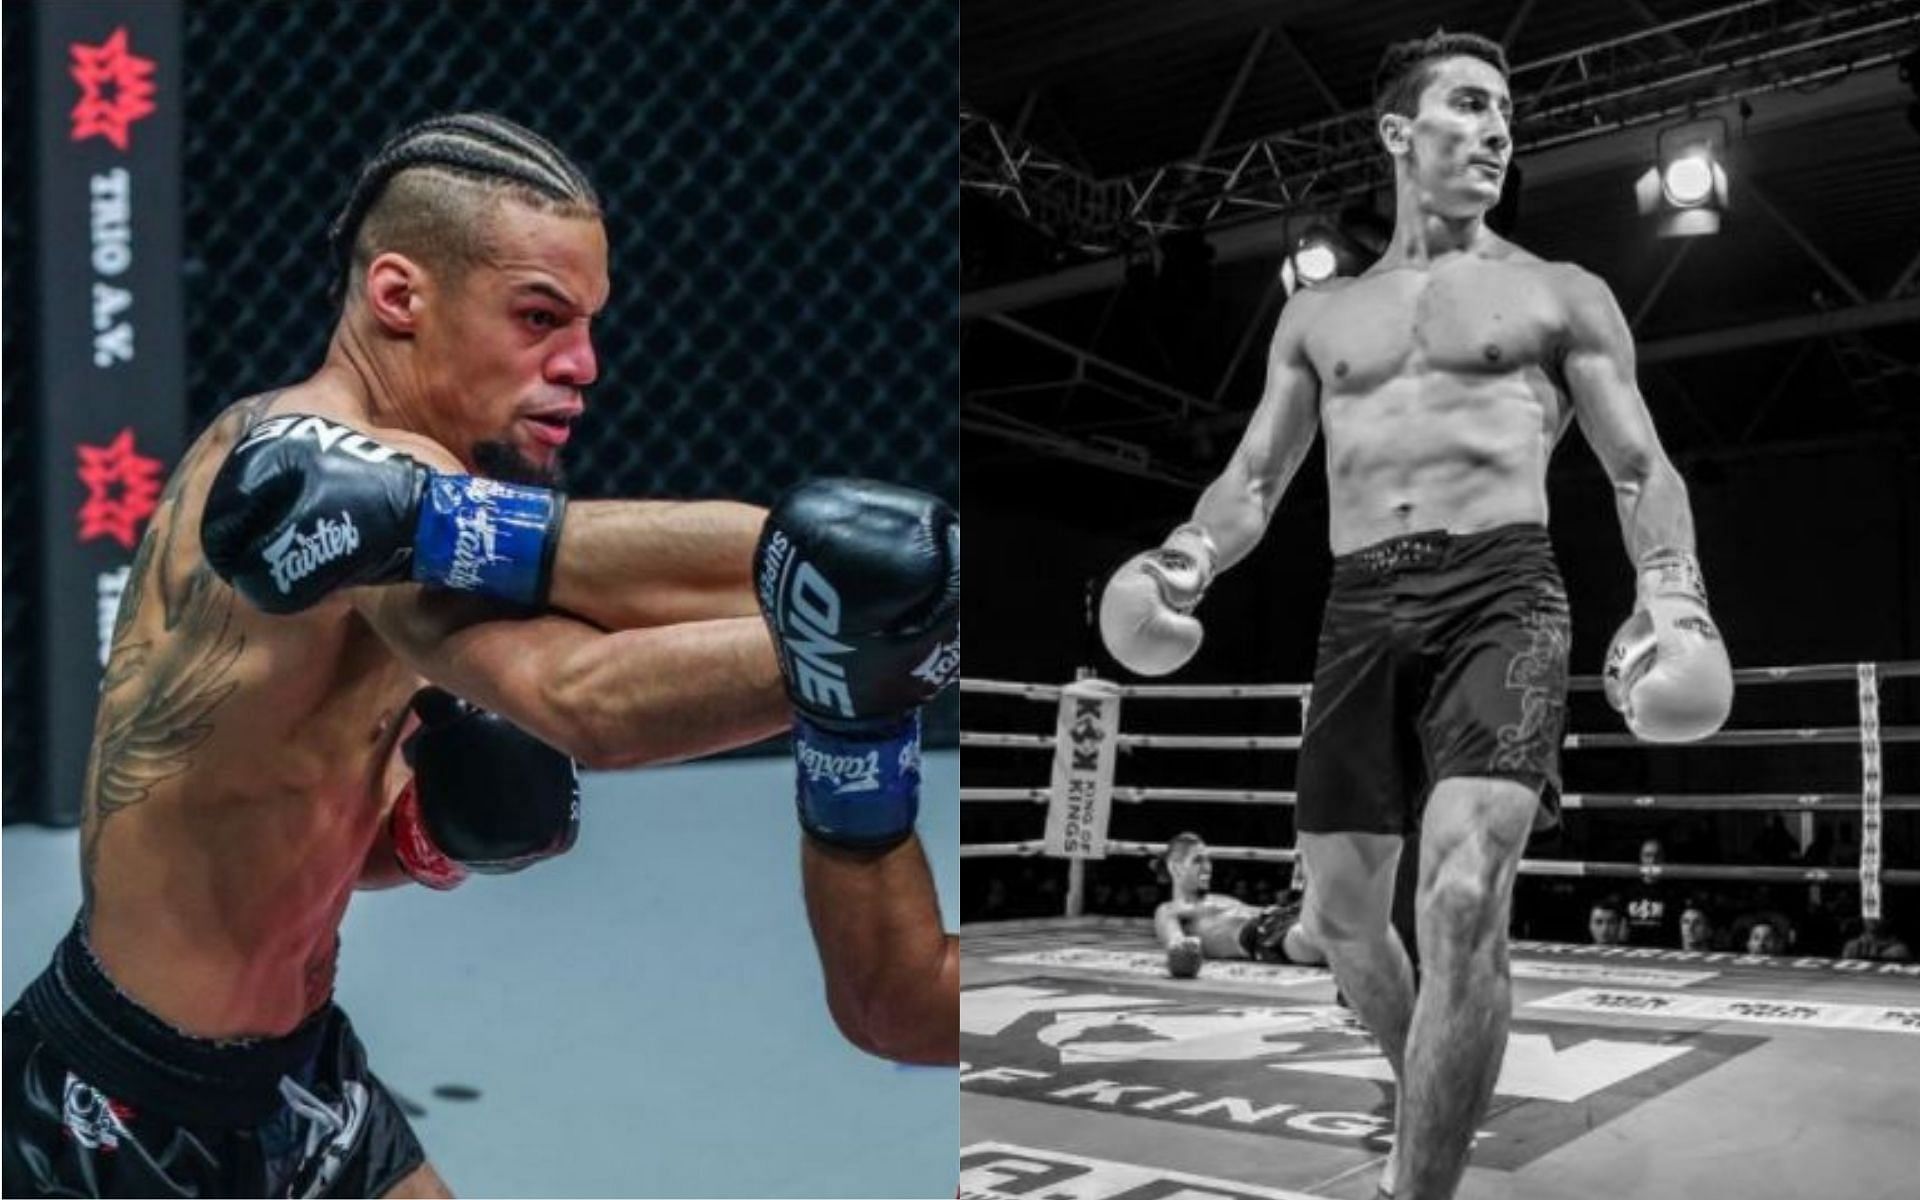 Regian Eersel (left) looks to defend his ONE Championship lightweight kickxing title against promotional newcomer Islam Murtazaev (right) at ONE: Winter Warriors. (Images Credits: @koolhydraat and @islam_murtazaev on Instagram)